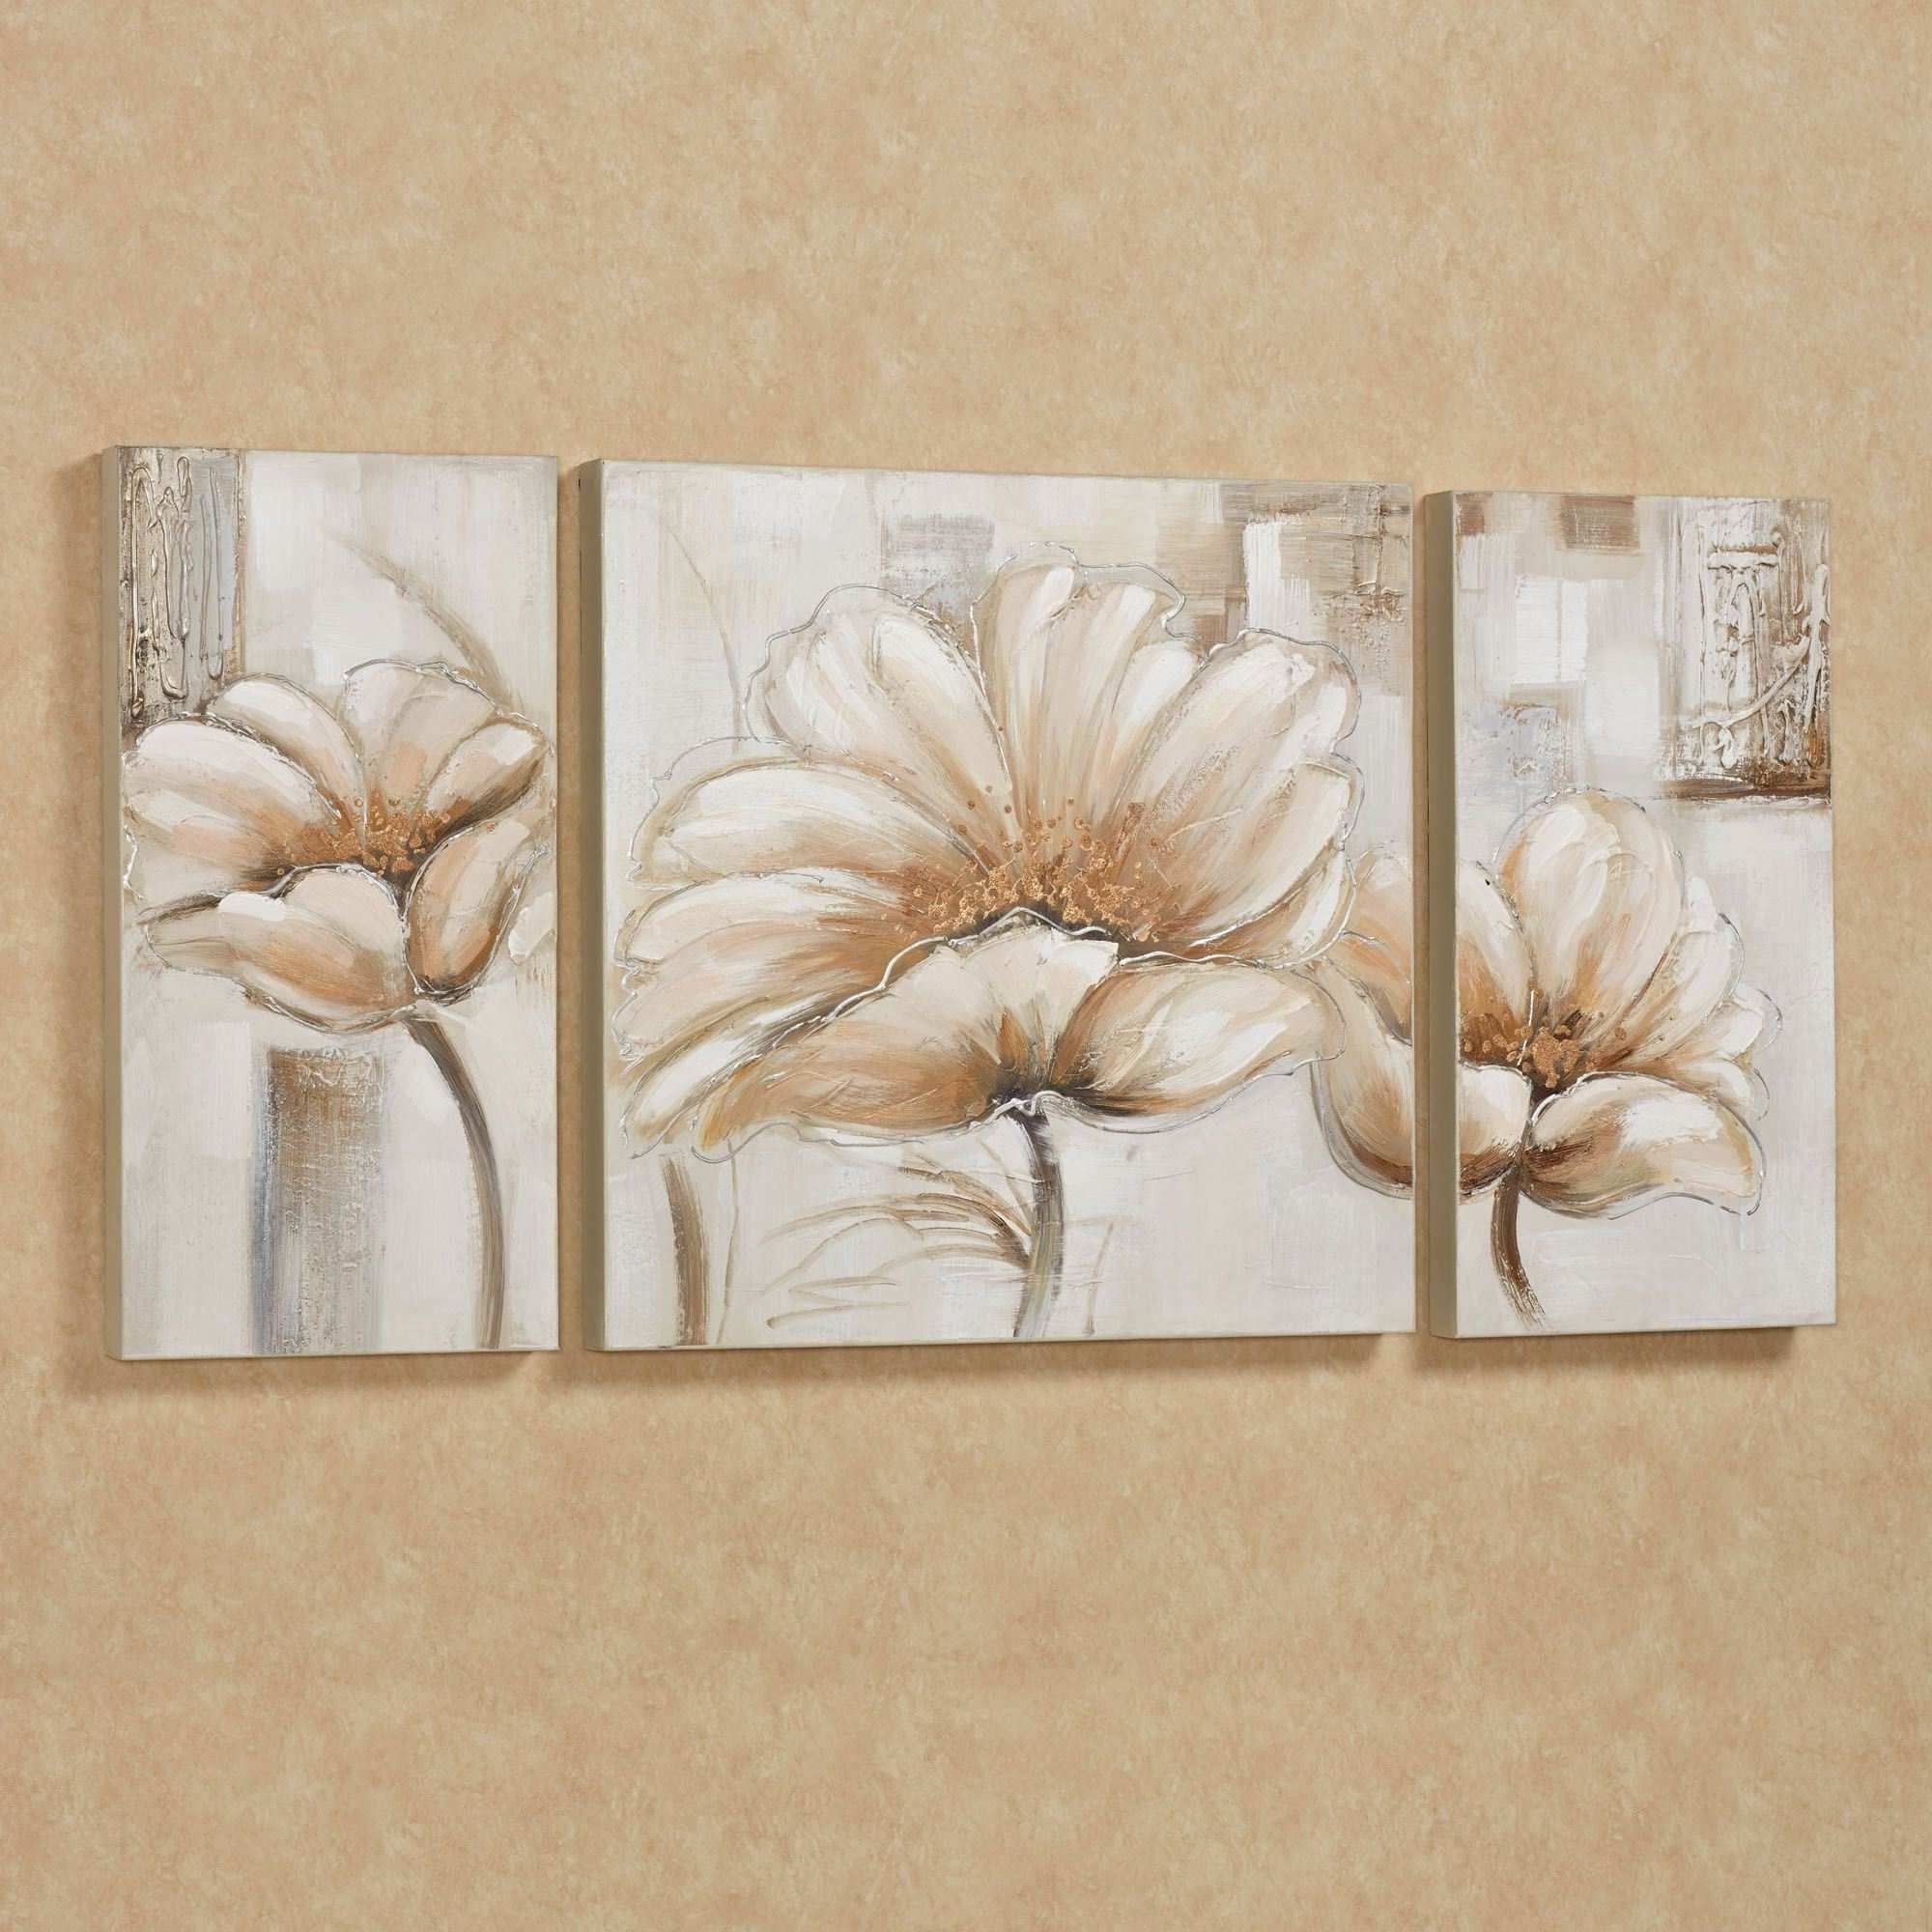 Popular Canvas Wall Art Ideas Awesome Blooming Splendor Floral Triptych Pertaining To Floral Canvas Wall Art (Photo 7 of 20)